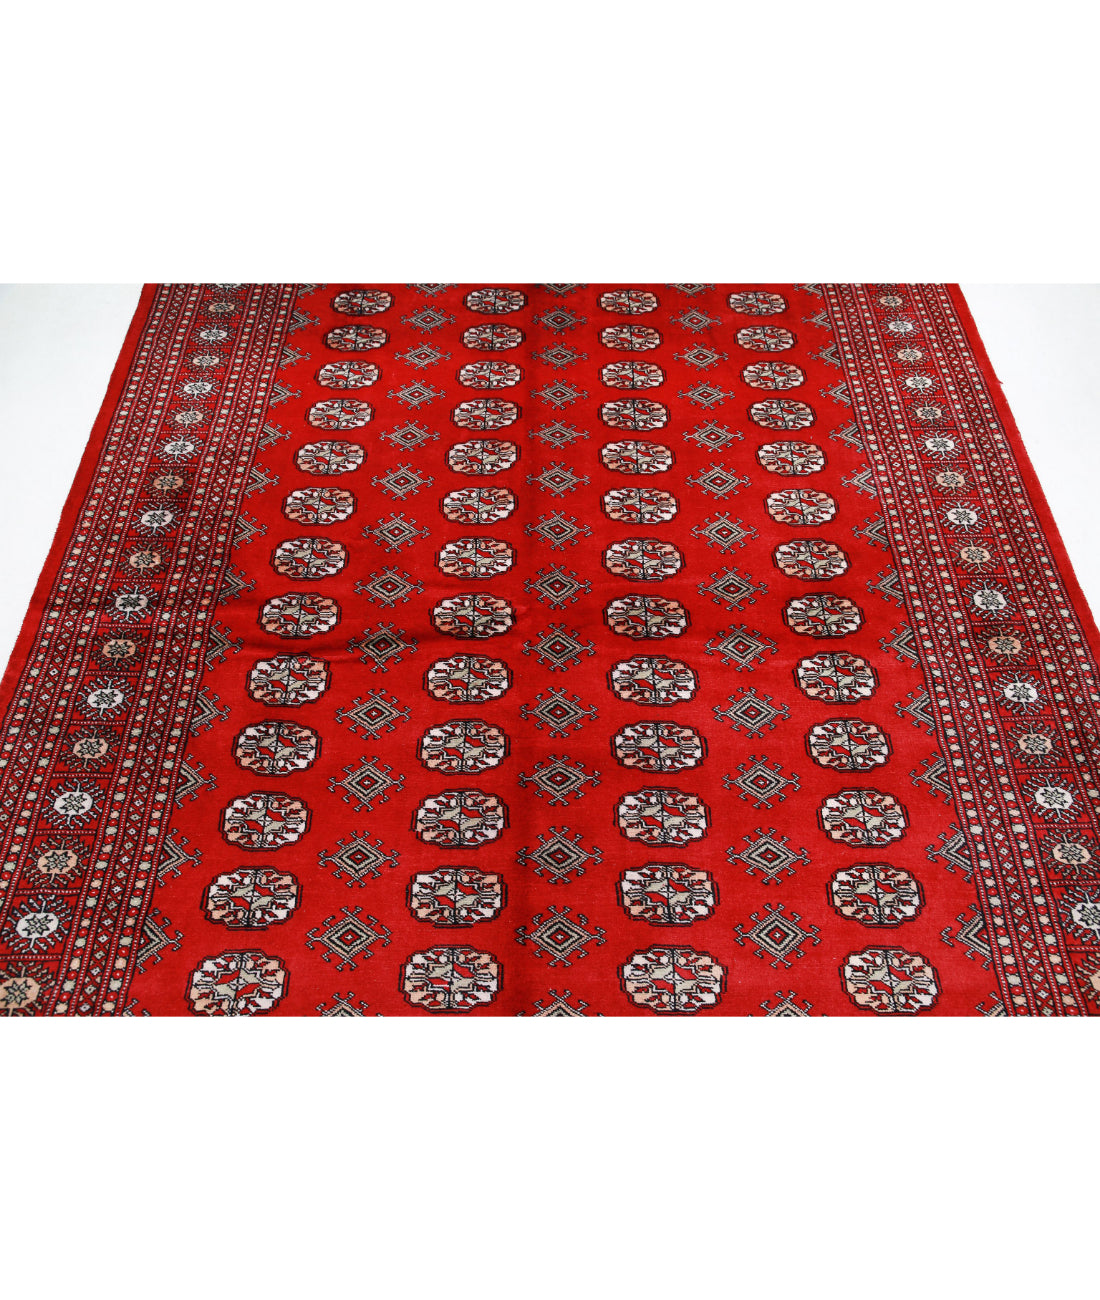 Hand Knotted Tribal Bokhara Wool Rug - 6'1'' x 8'9'' 6'1'' x 8'9'' (183 X 263) / Red / Black